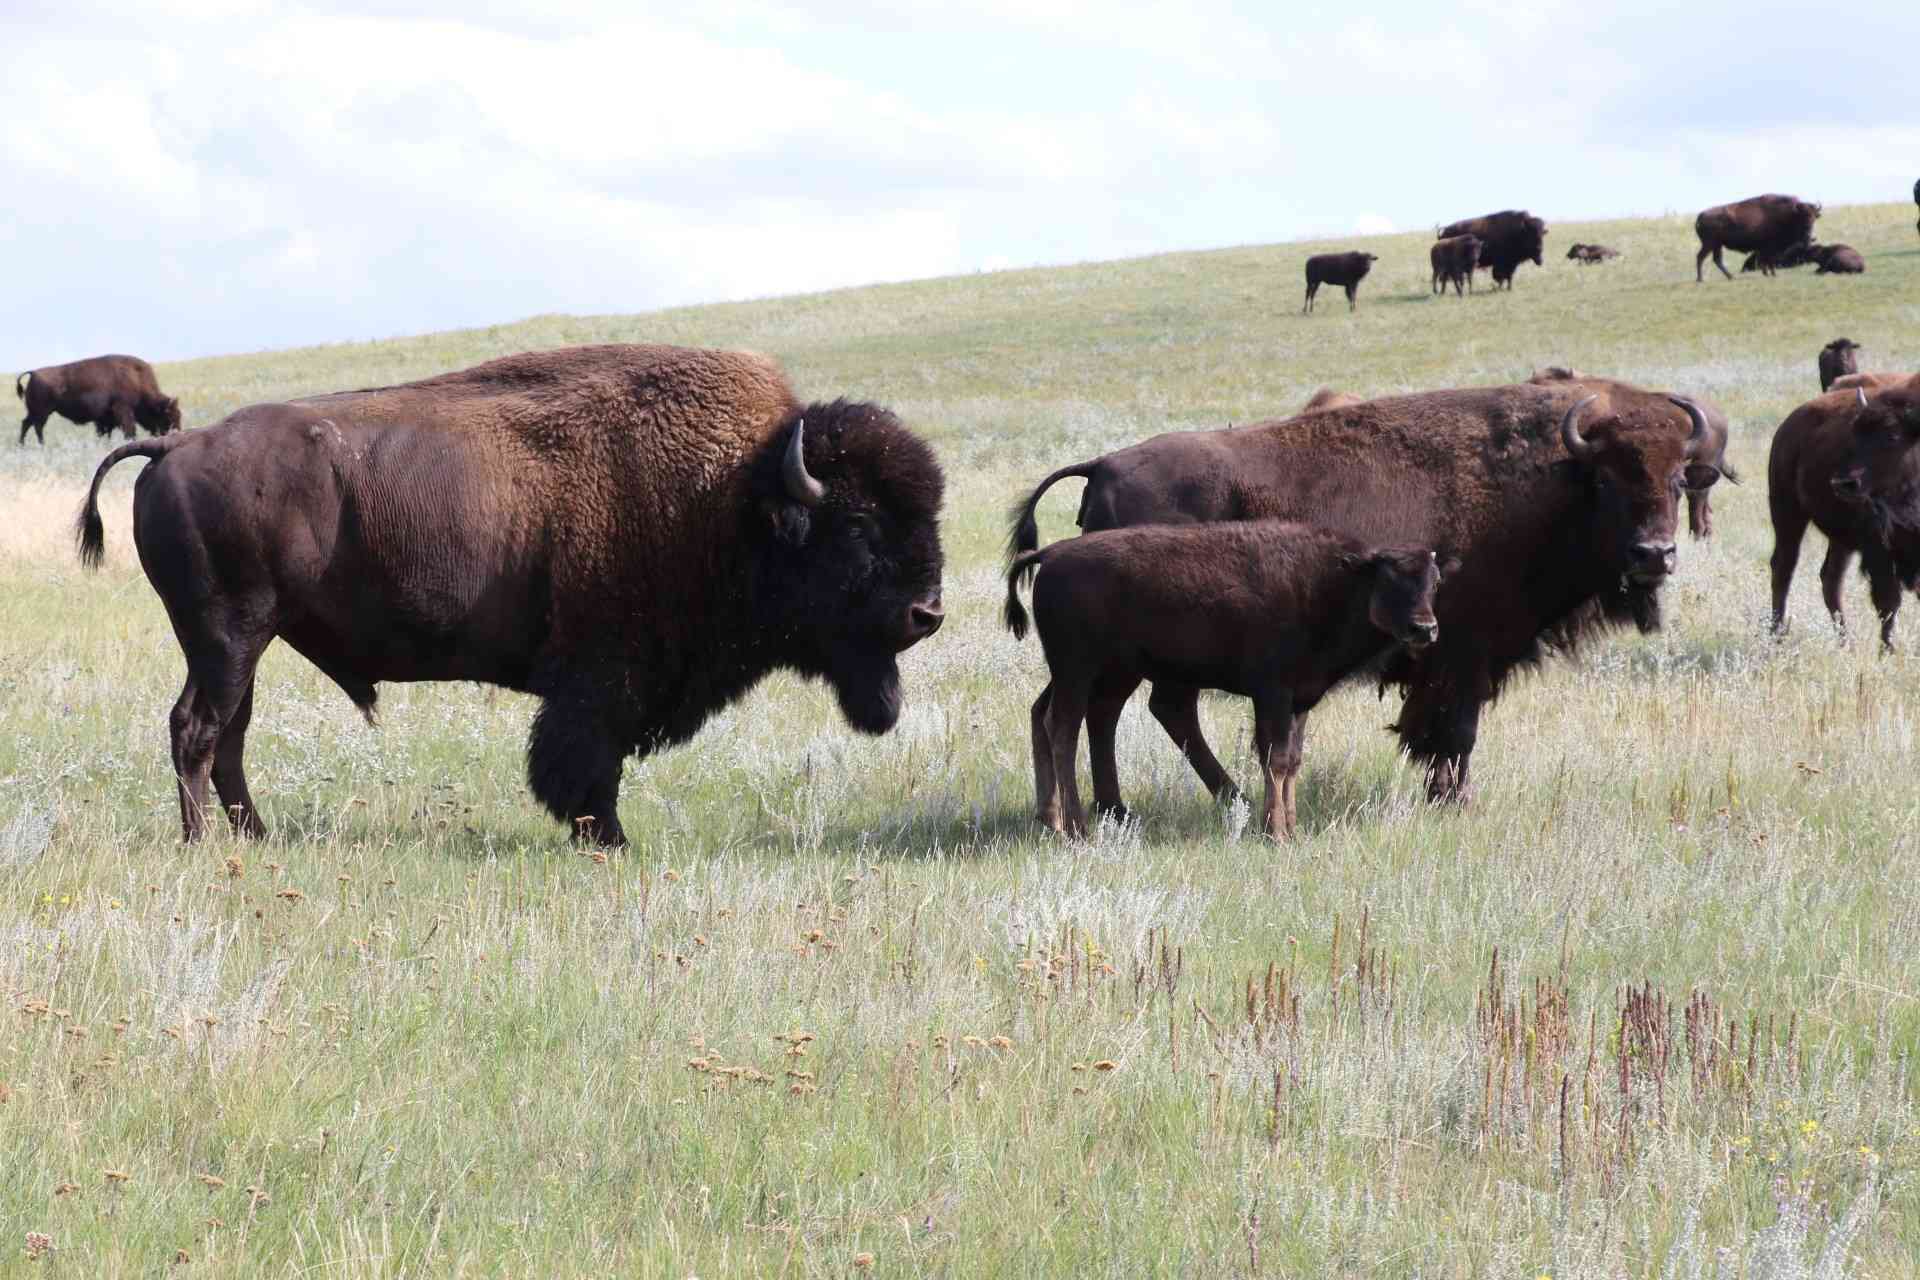 2019.08.22 - DITL - Fort Peck Bison Release - Bison release family - MS landscape - Chamois Andersen-DOW